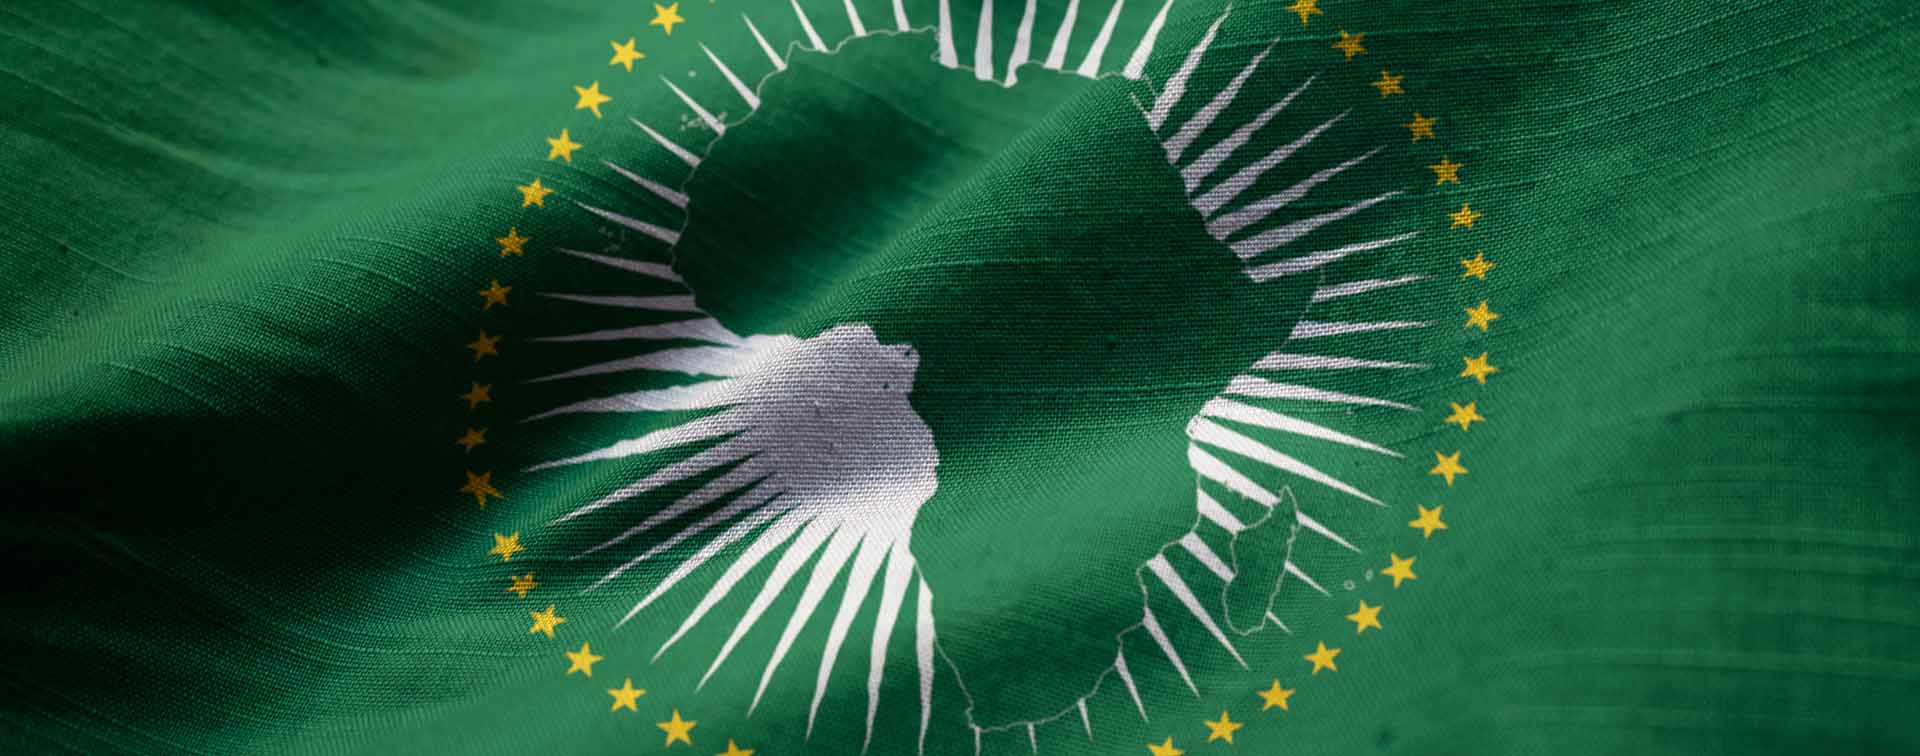 The flag of the African Union